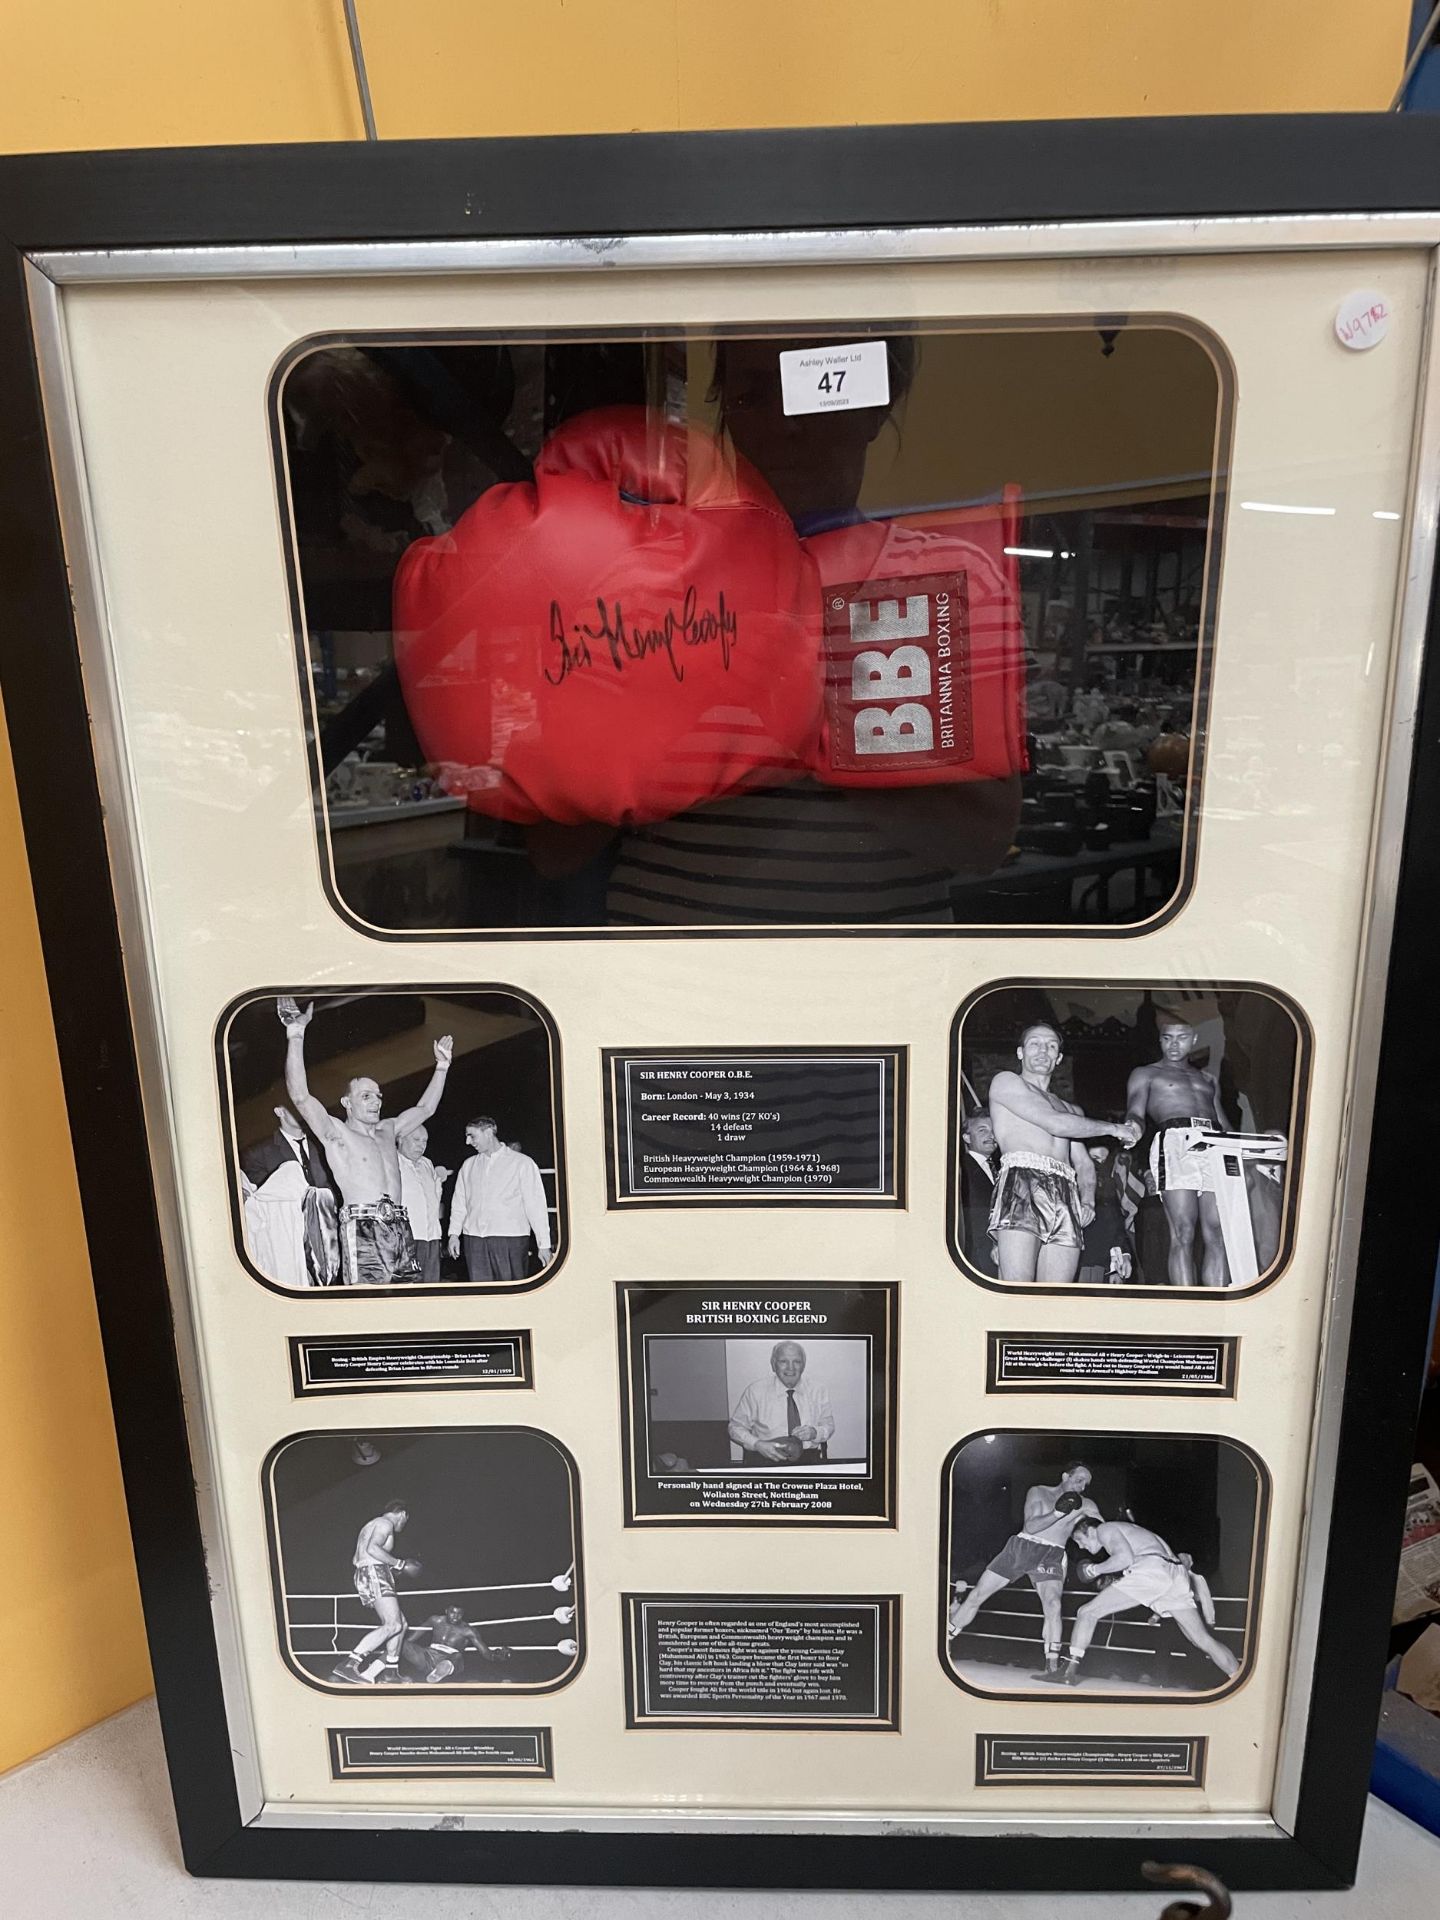 A FRAMED SIR HENRY COOPER O.B.E BOXING MONTAGE WITH SIGNED BOXING GLOVE AND PHOTOS